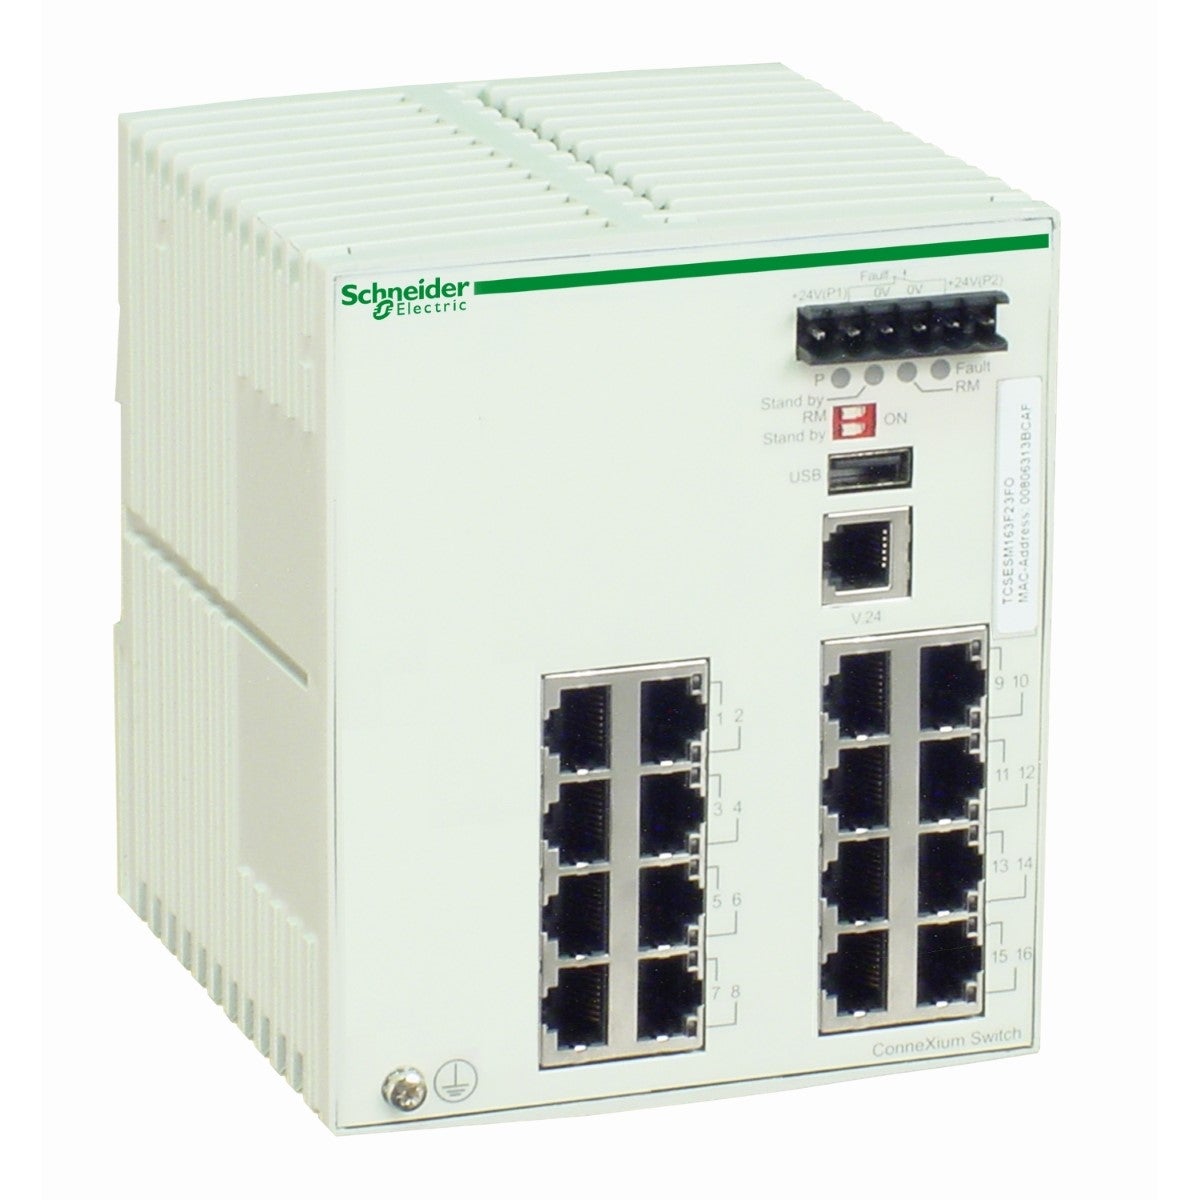 ConneXium Managed Switch - 16 ports for copper